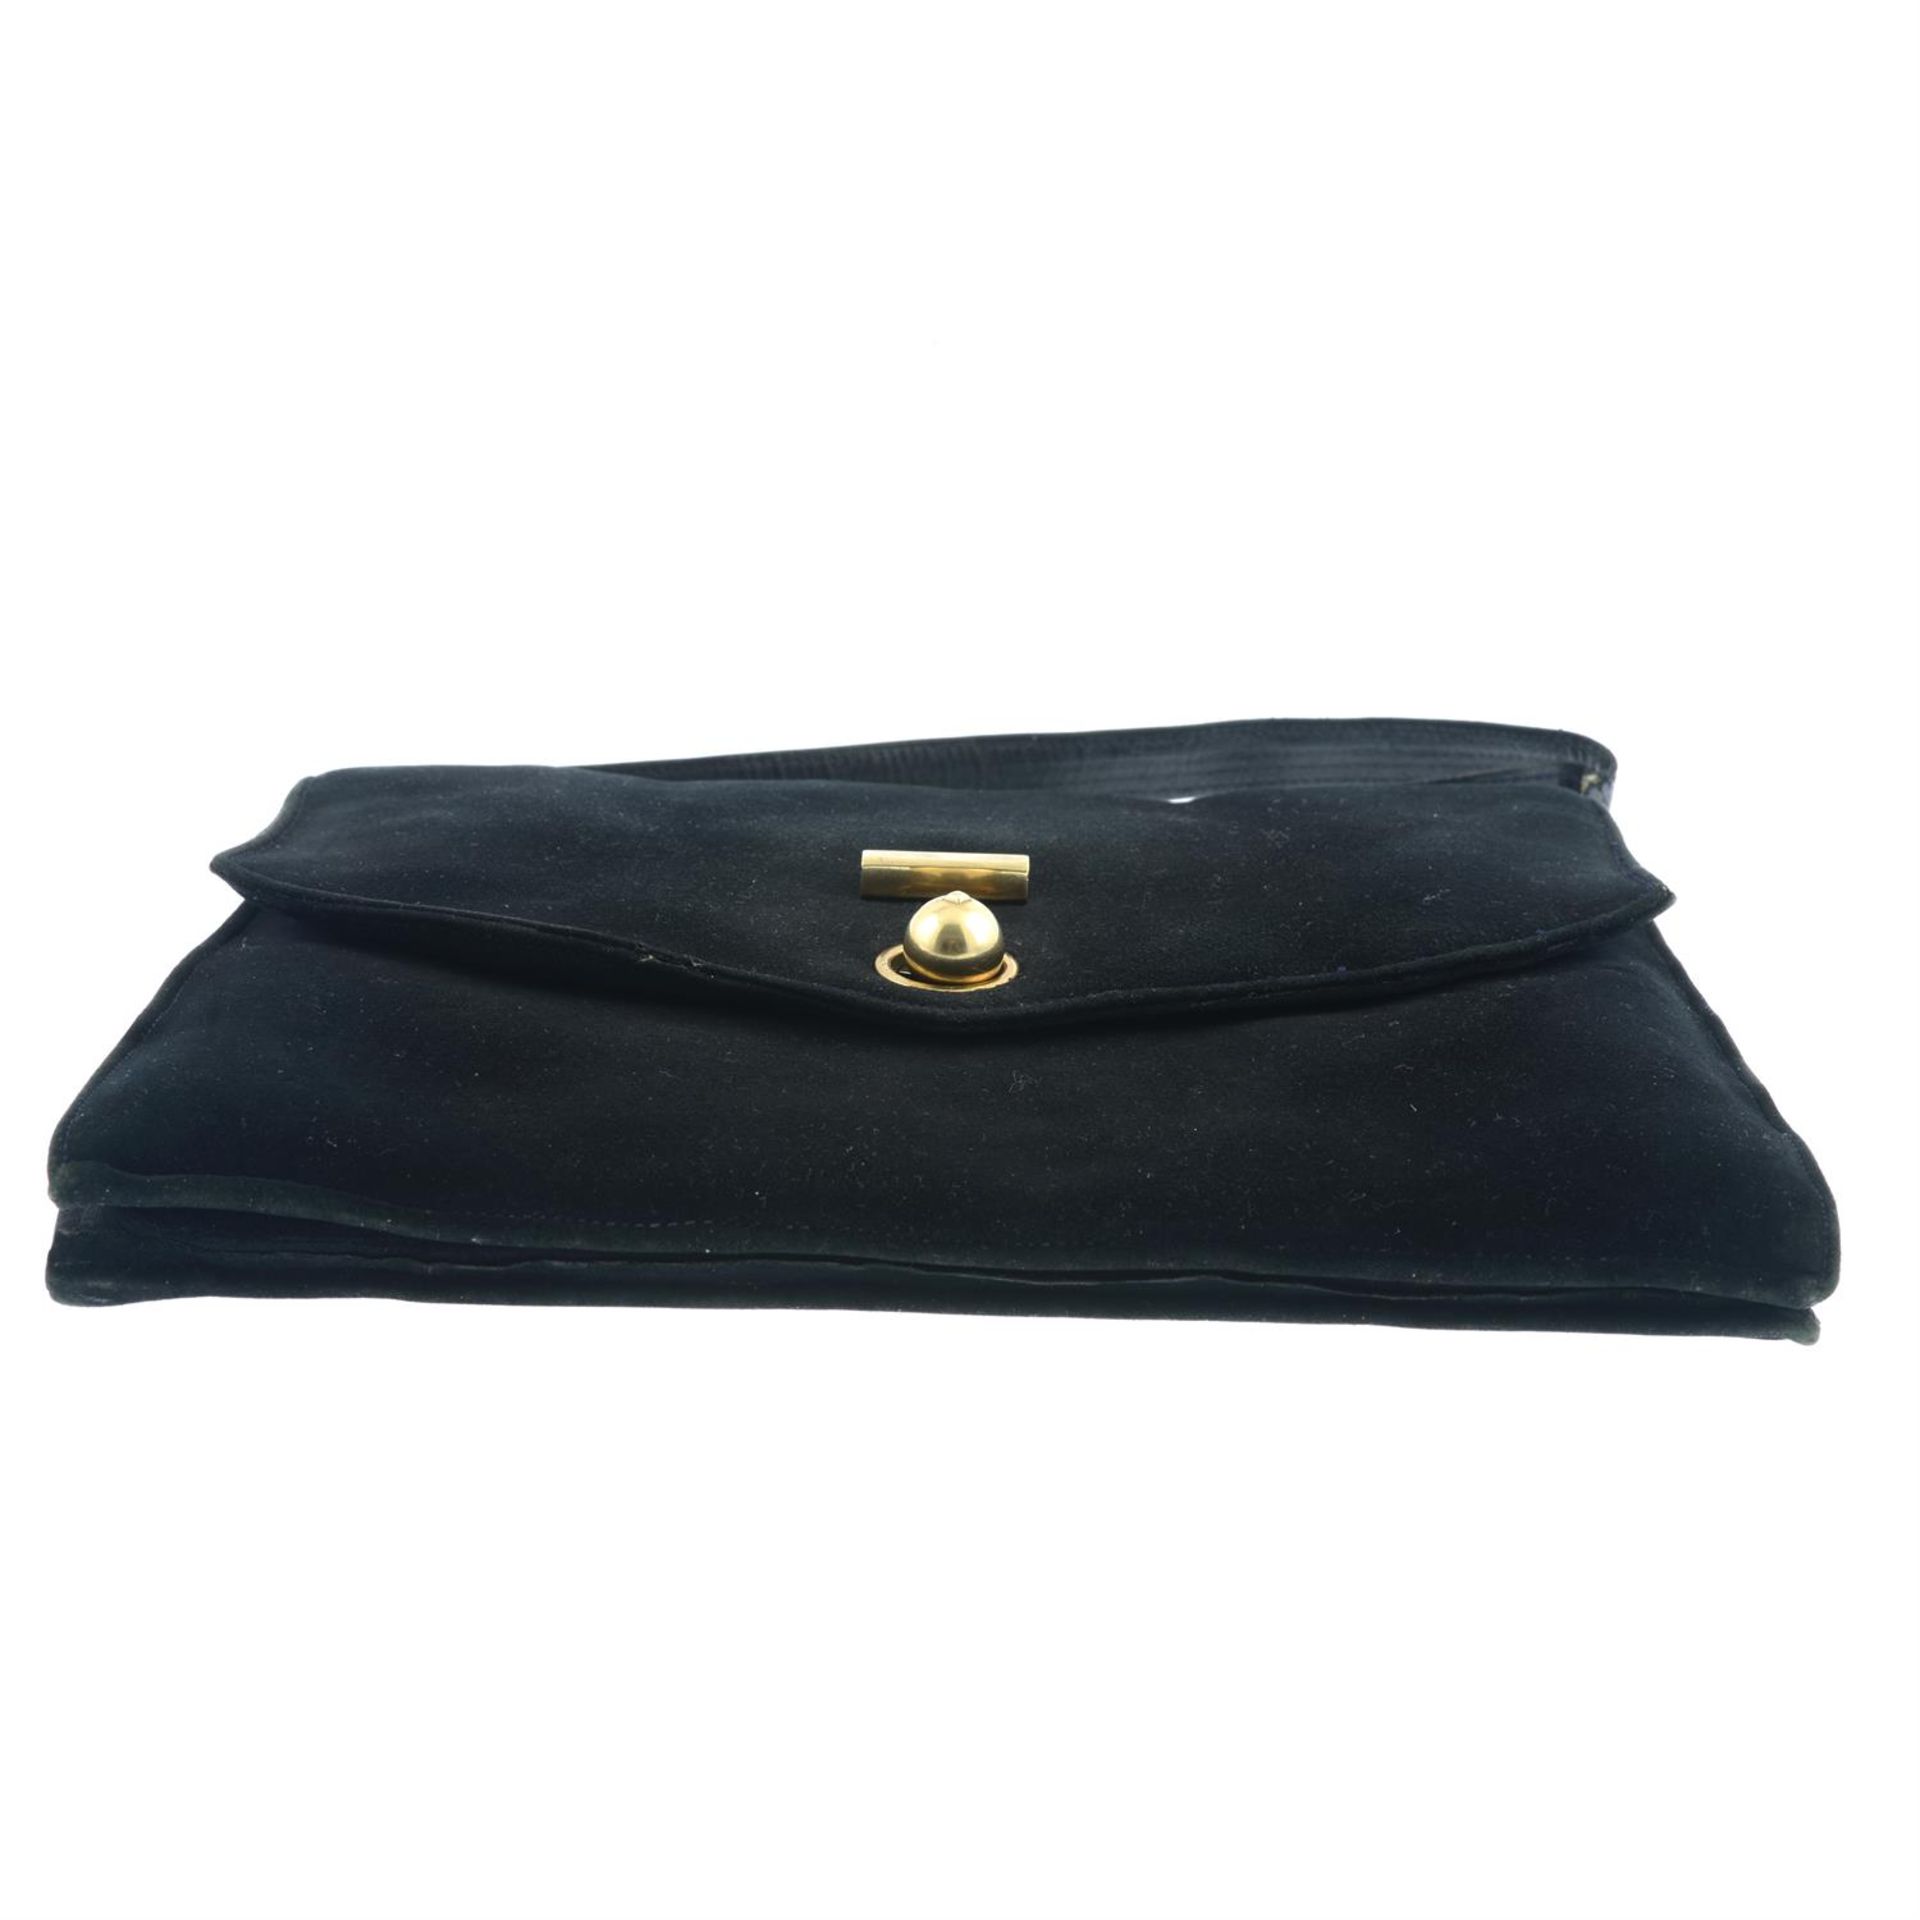 CARTIER - a 1930s black suede leather handbag with 9ct gold hardware. - Image 4 of 8